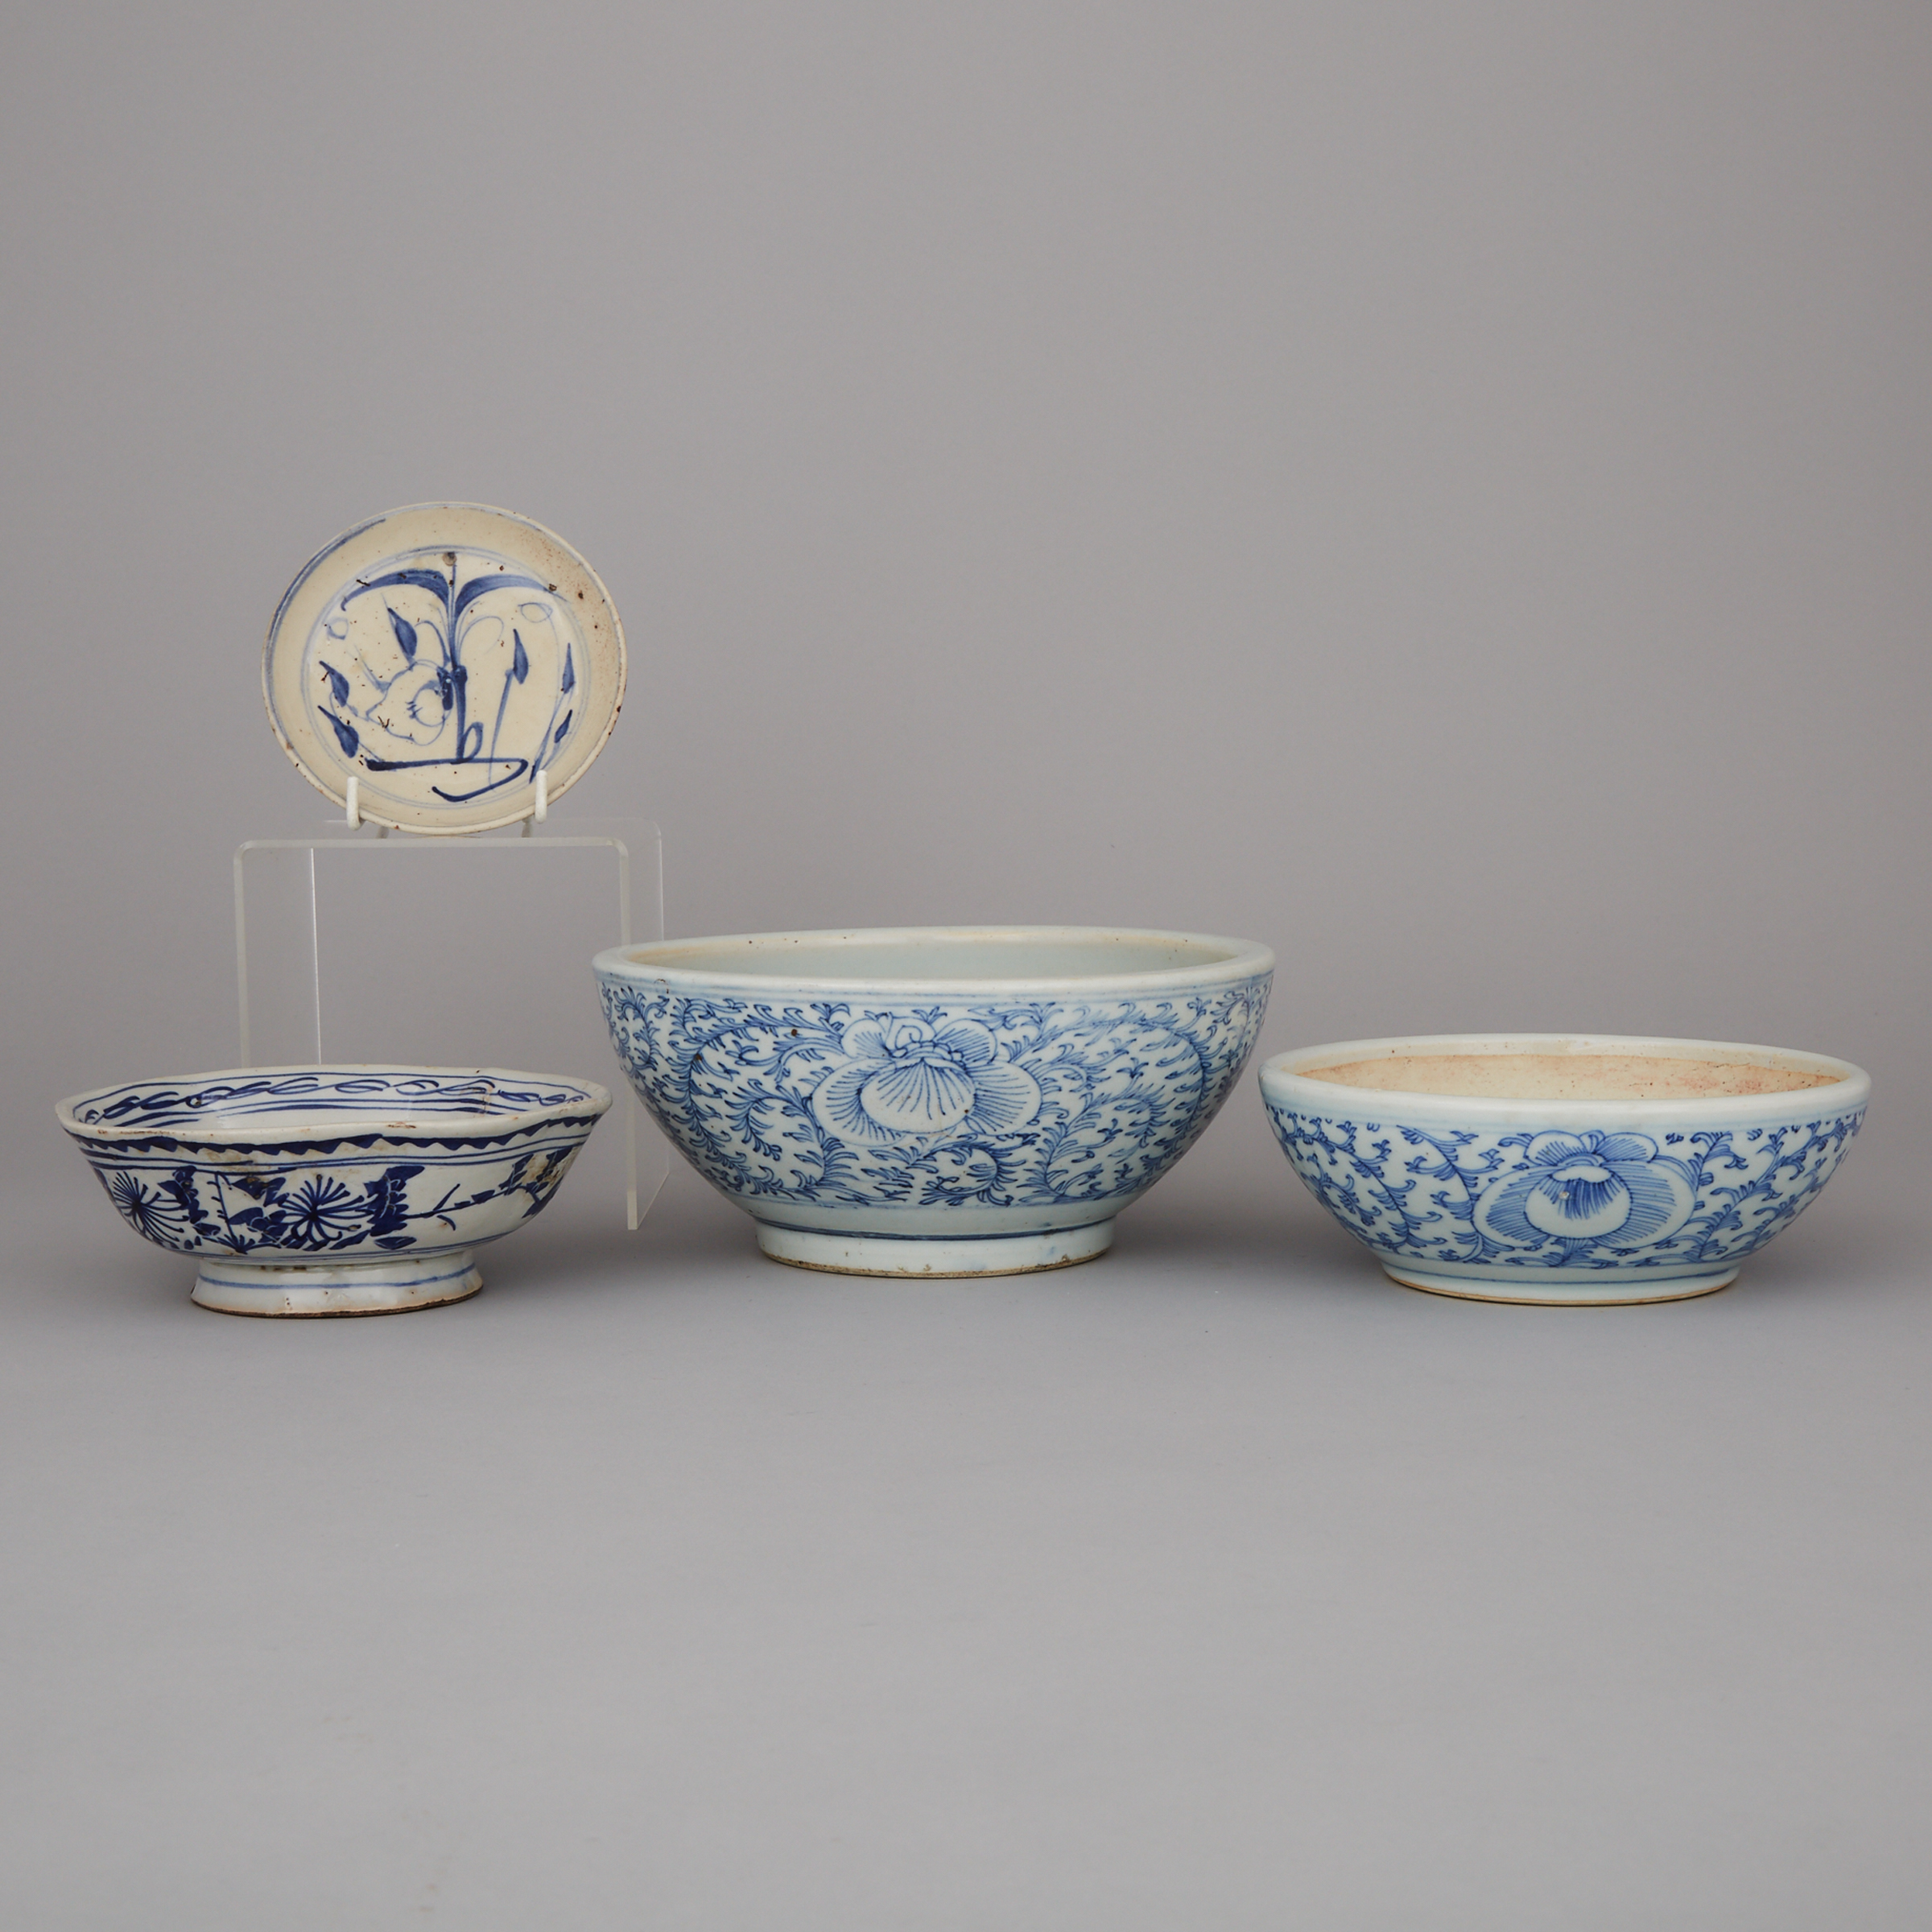 Two Blue and White 'Lotus' Mortar Bowls, 19th Century